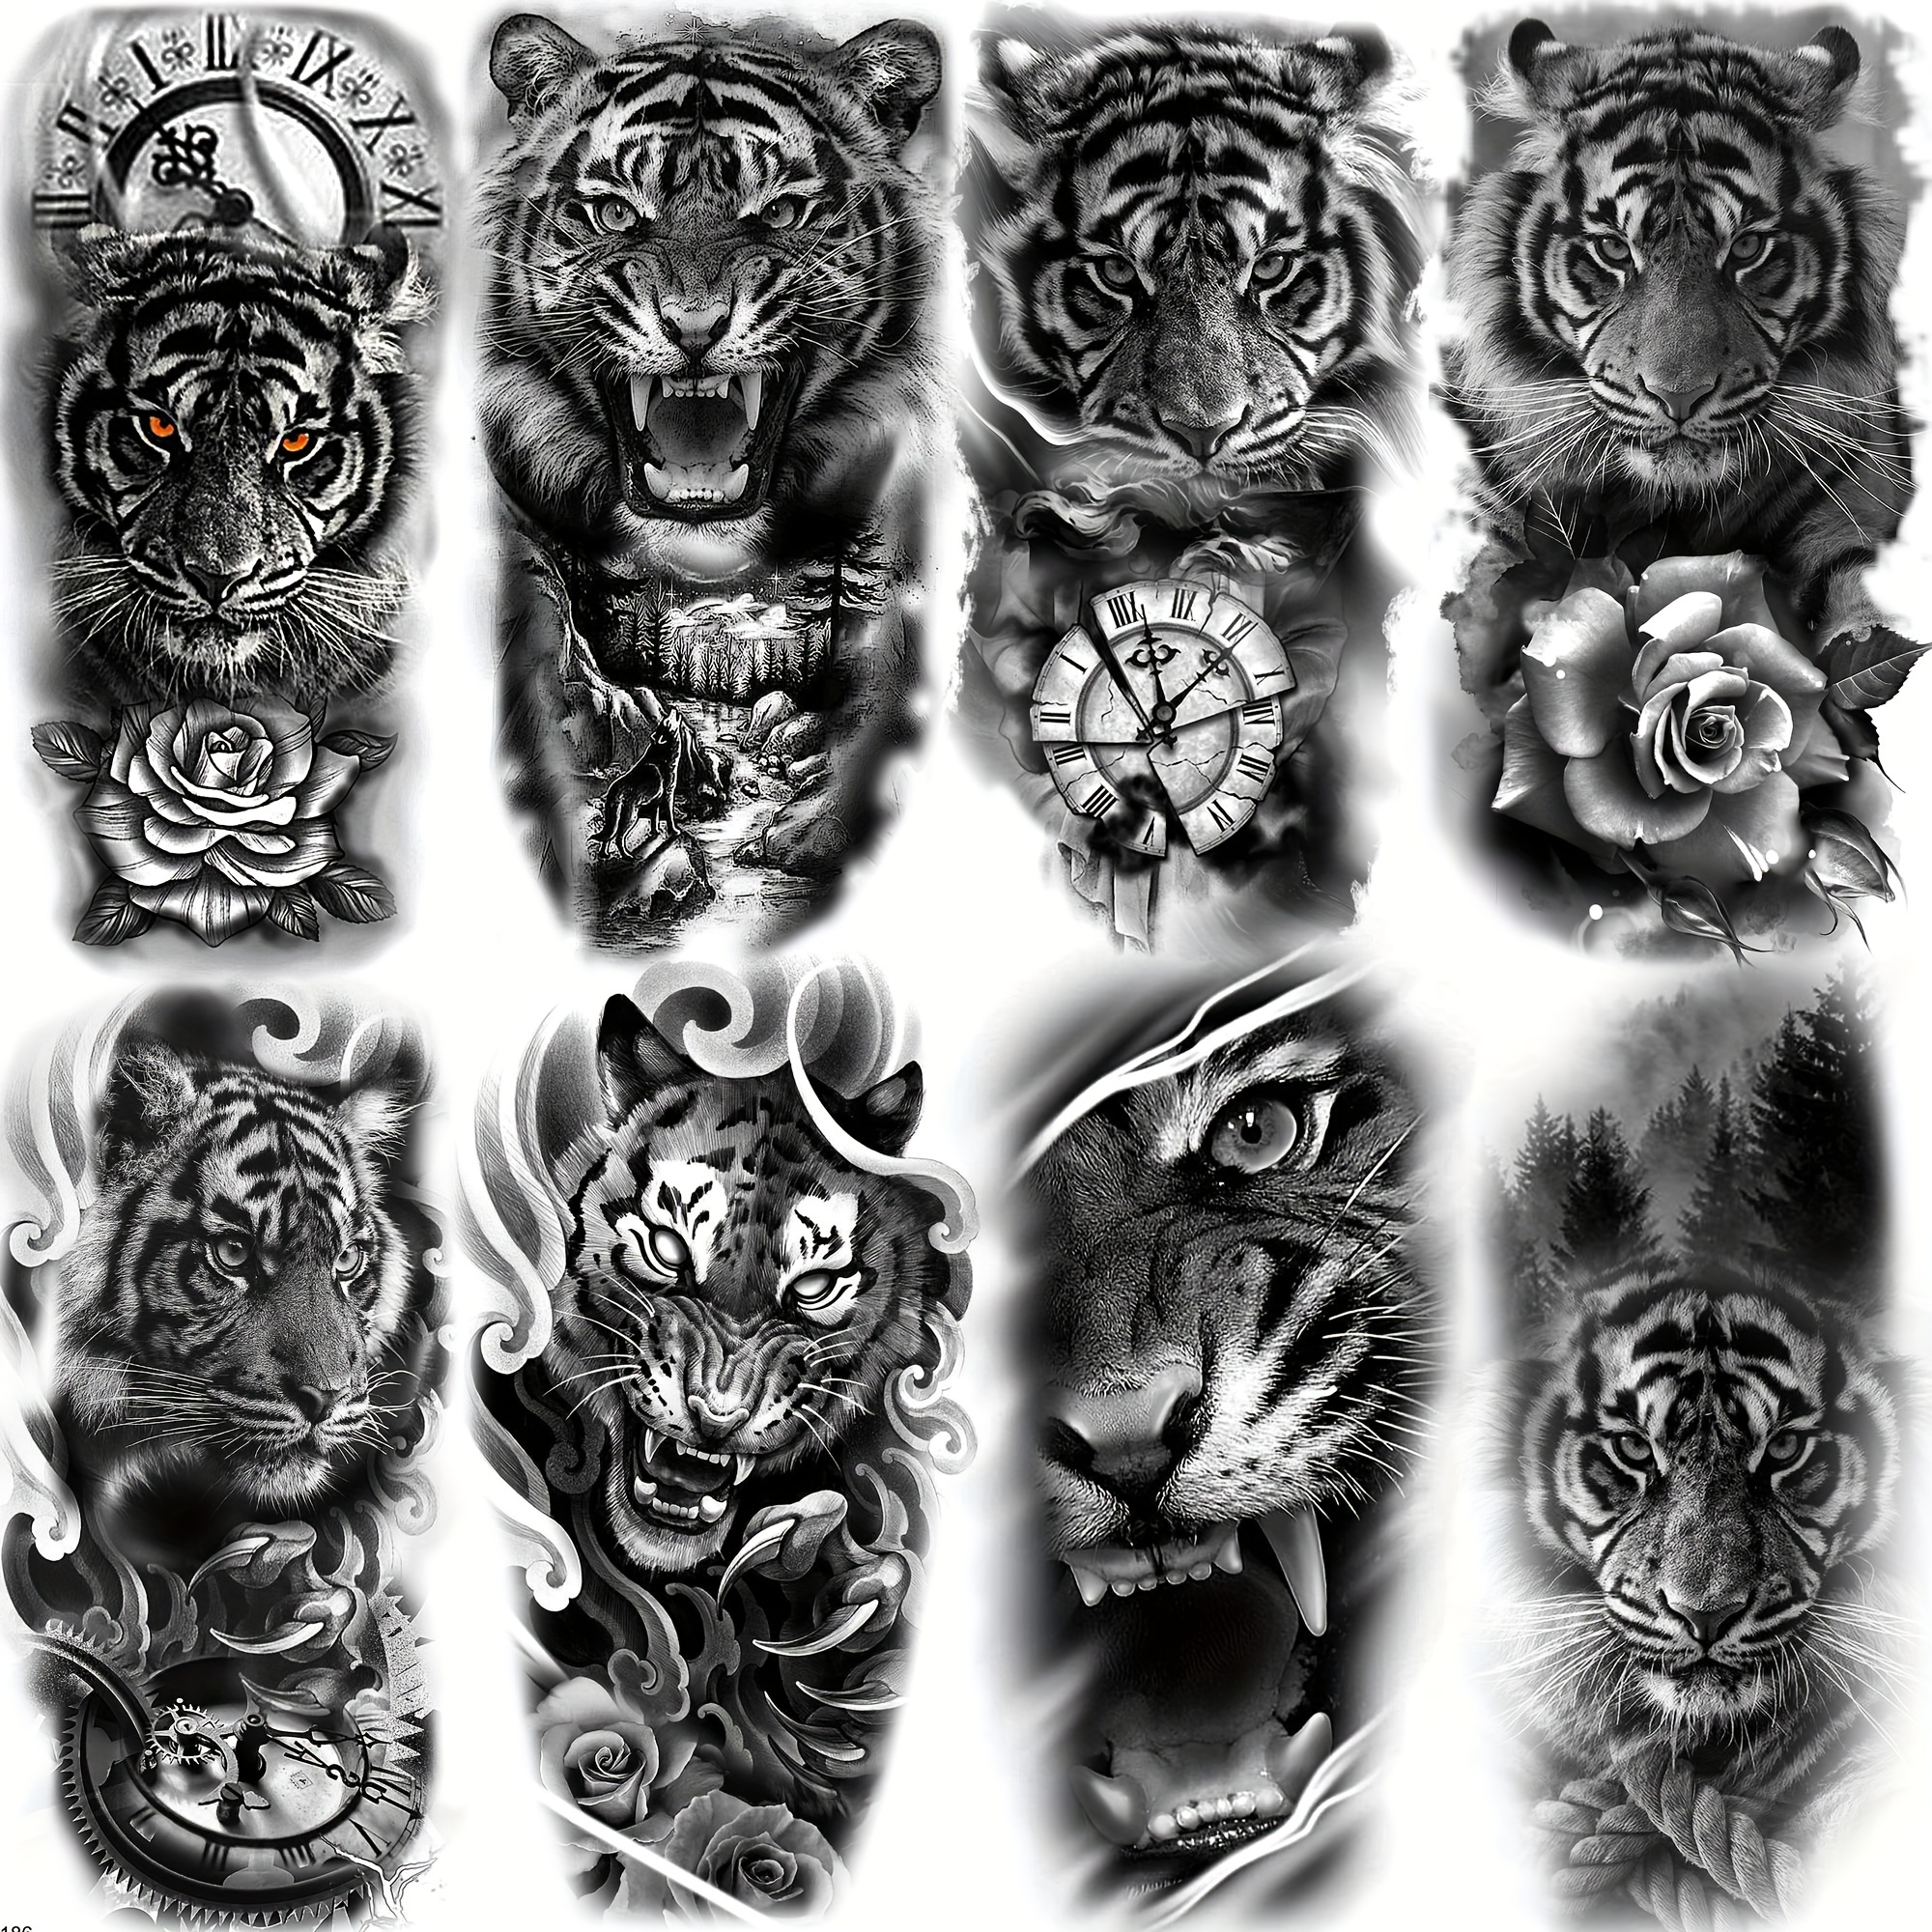 

8 Sheets Realistic Tribal Large Tiger Temporary Tattoo Stickers For Women Adults, Half Arm Sleeve Tattoos For Men, 3d Black Tiger Compass Flower Tattoos Decals